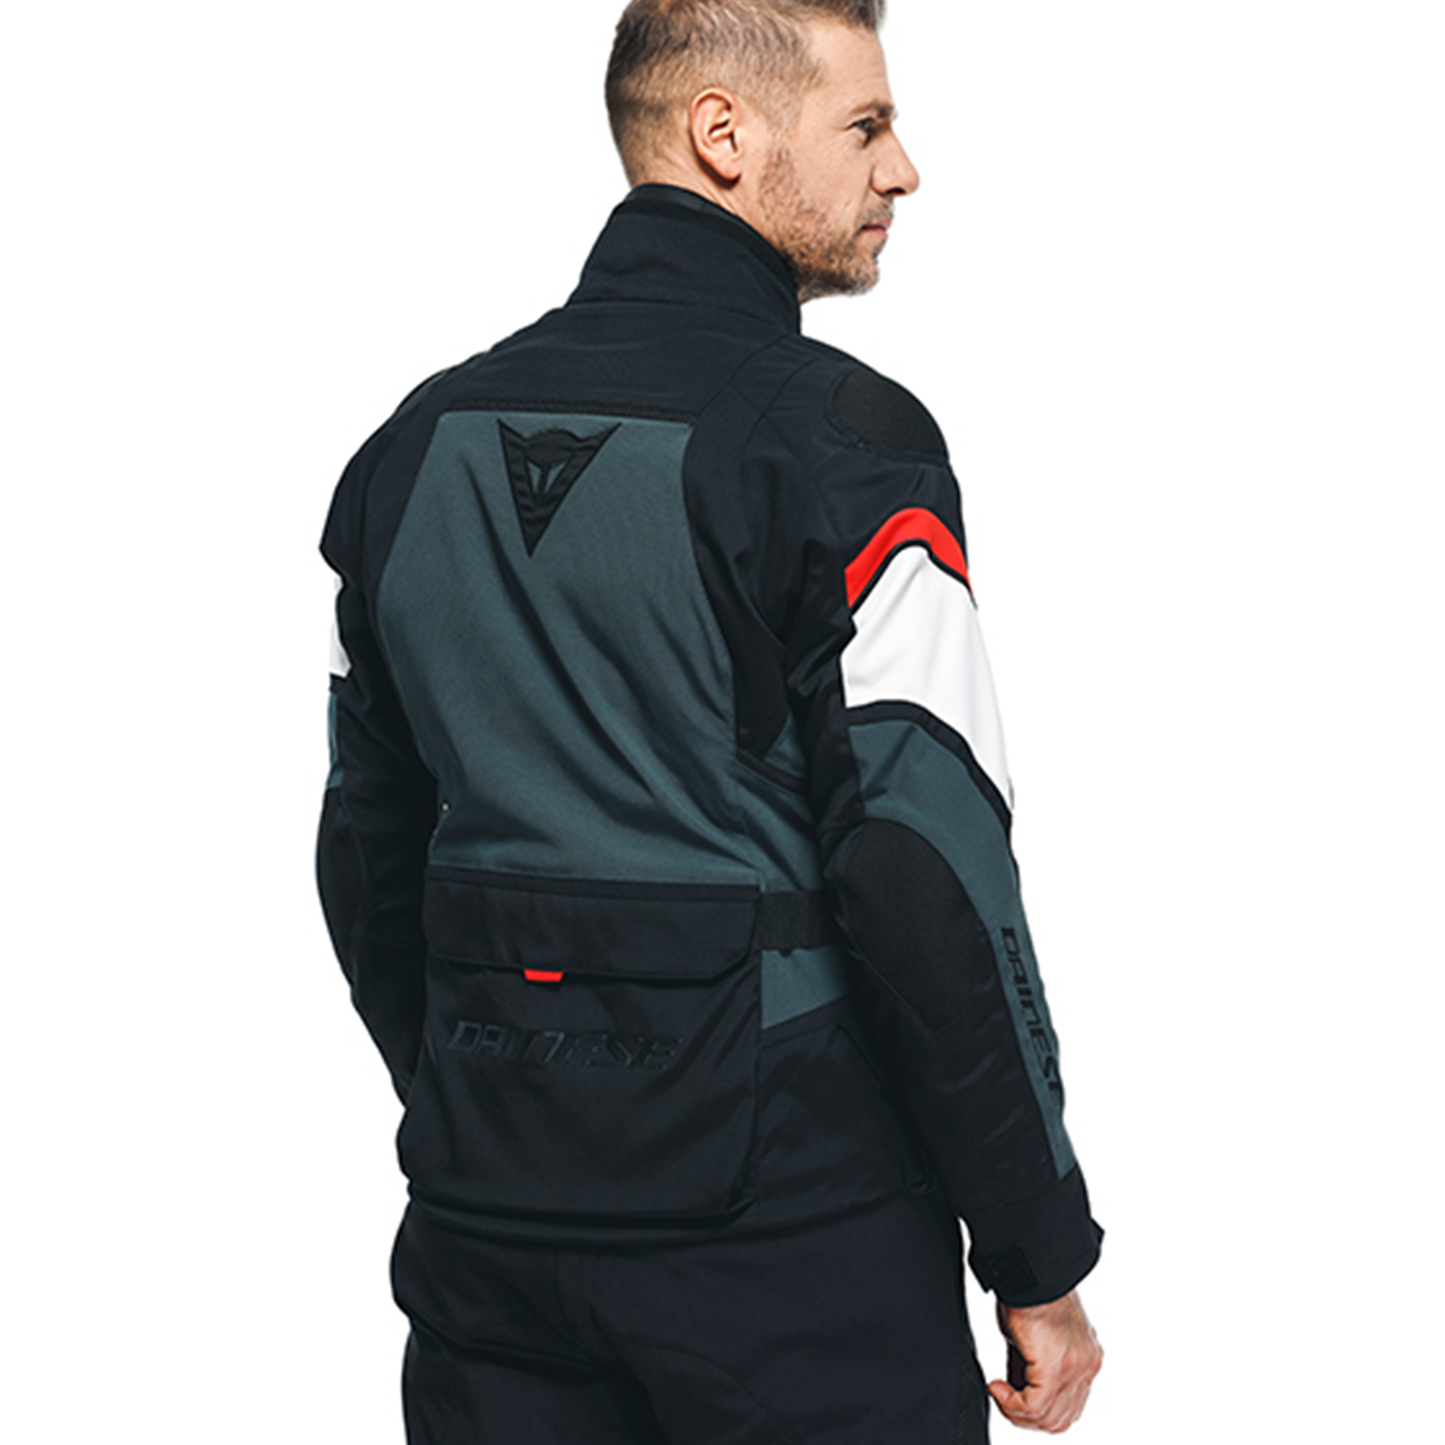 Dainese Carve Master 3 Gore-Tex Jacket - 06C